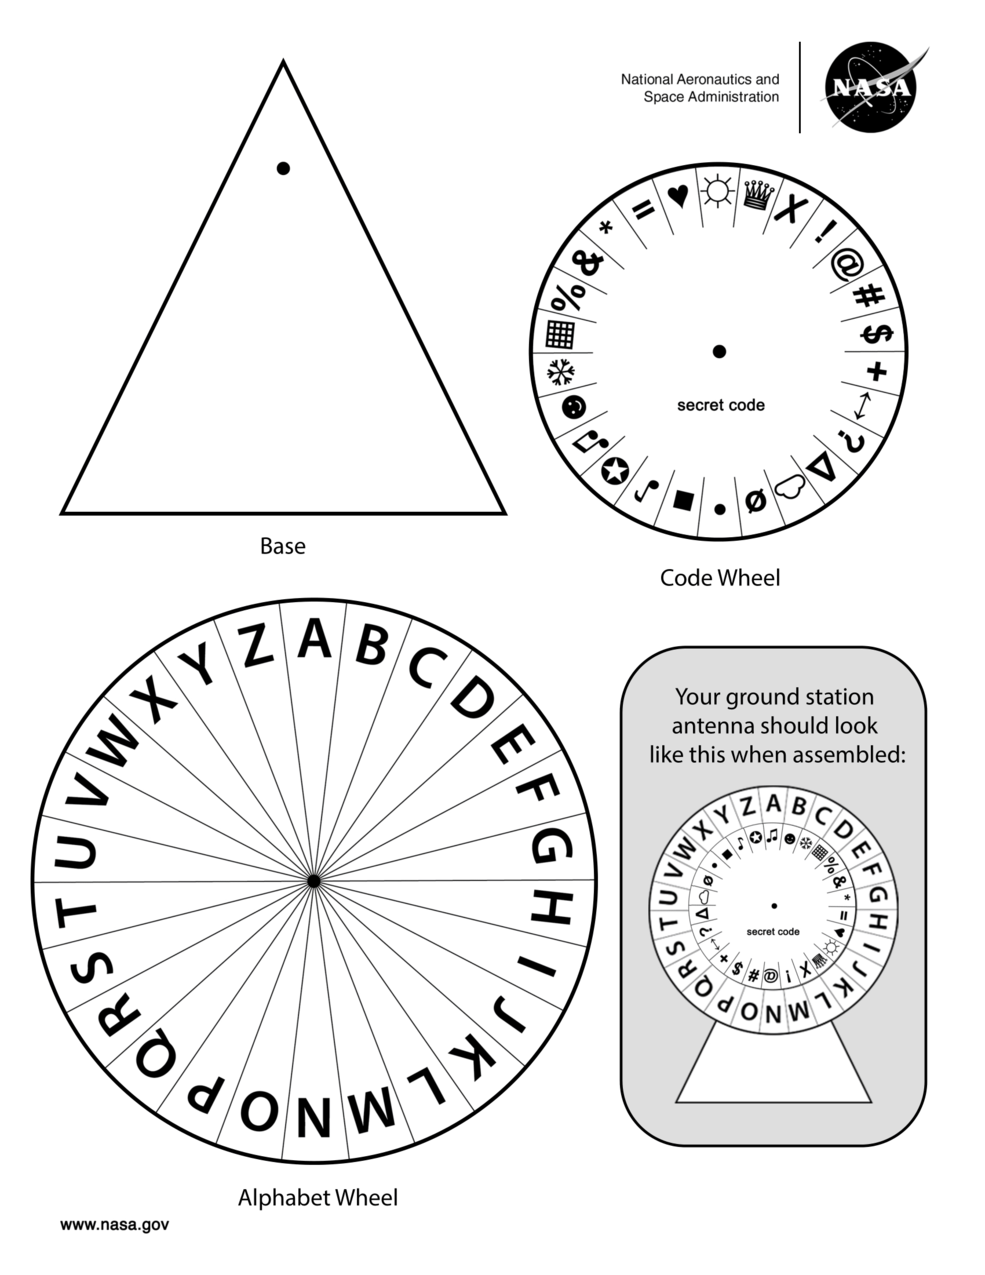 Second page of the Build Your Own Coding Activity for grades kindergarten through third. From top left to right, rotating clockwise, is a triangle, small circle, larger circle, and an image of how to assemble the pieces.